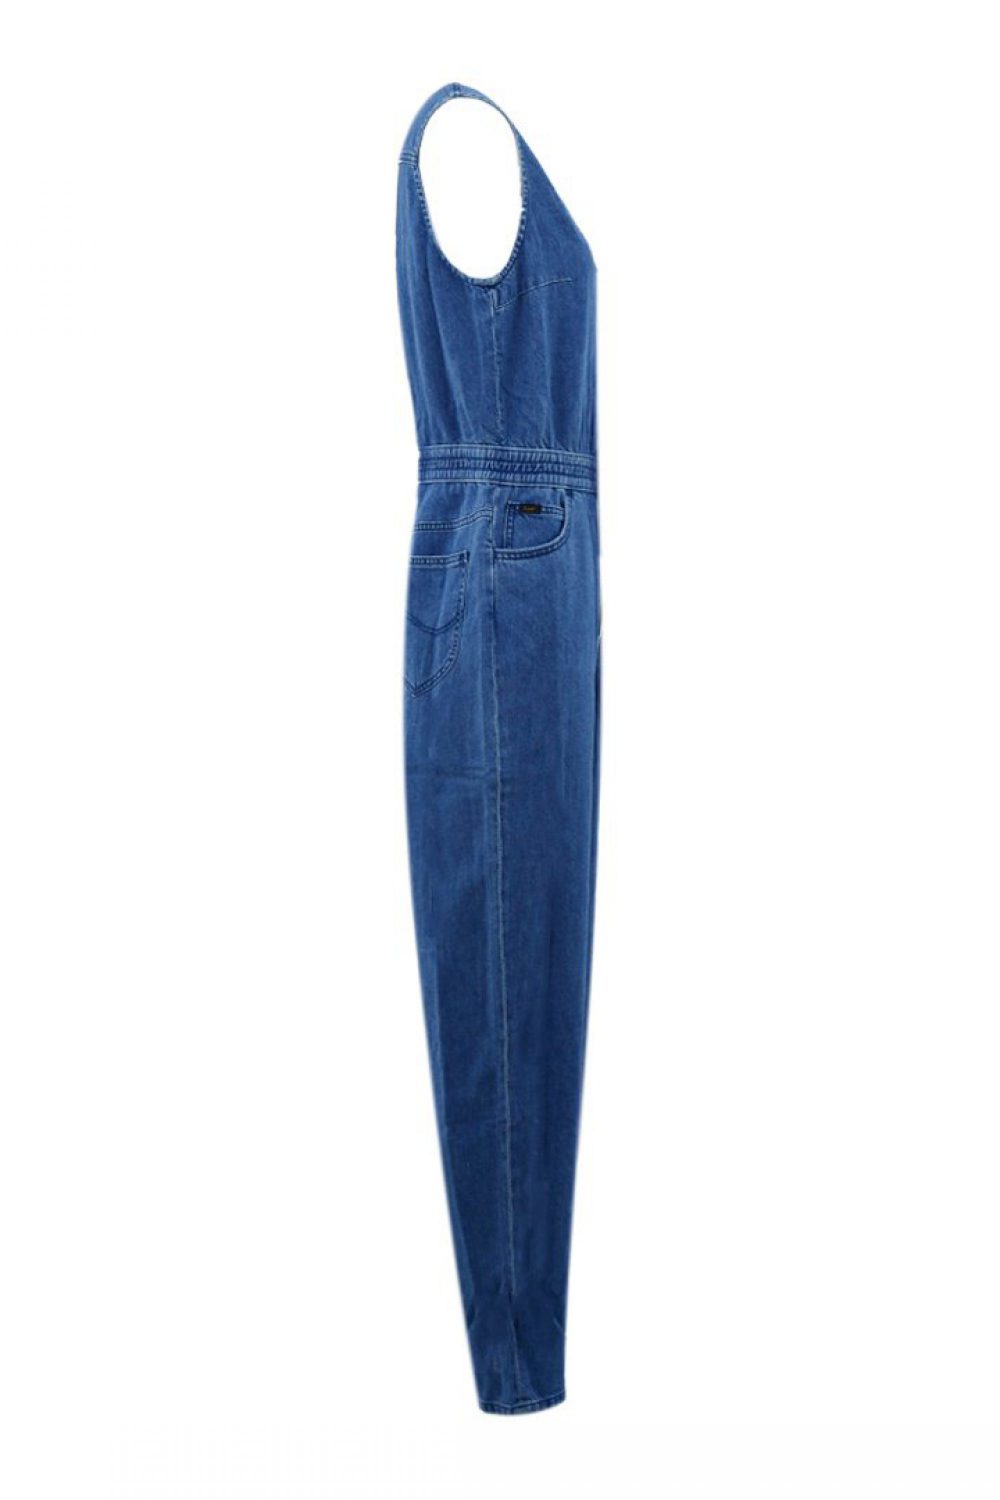 LEE Jean Jumpsuit Elasticated Overall Women - Mid Zola (L39CPUBQ)